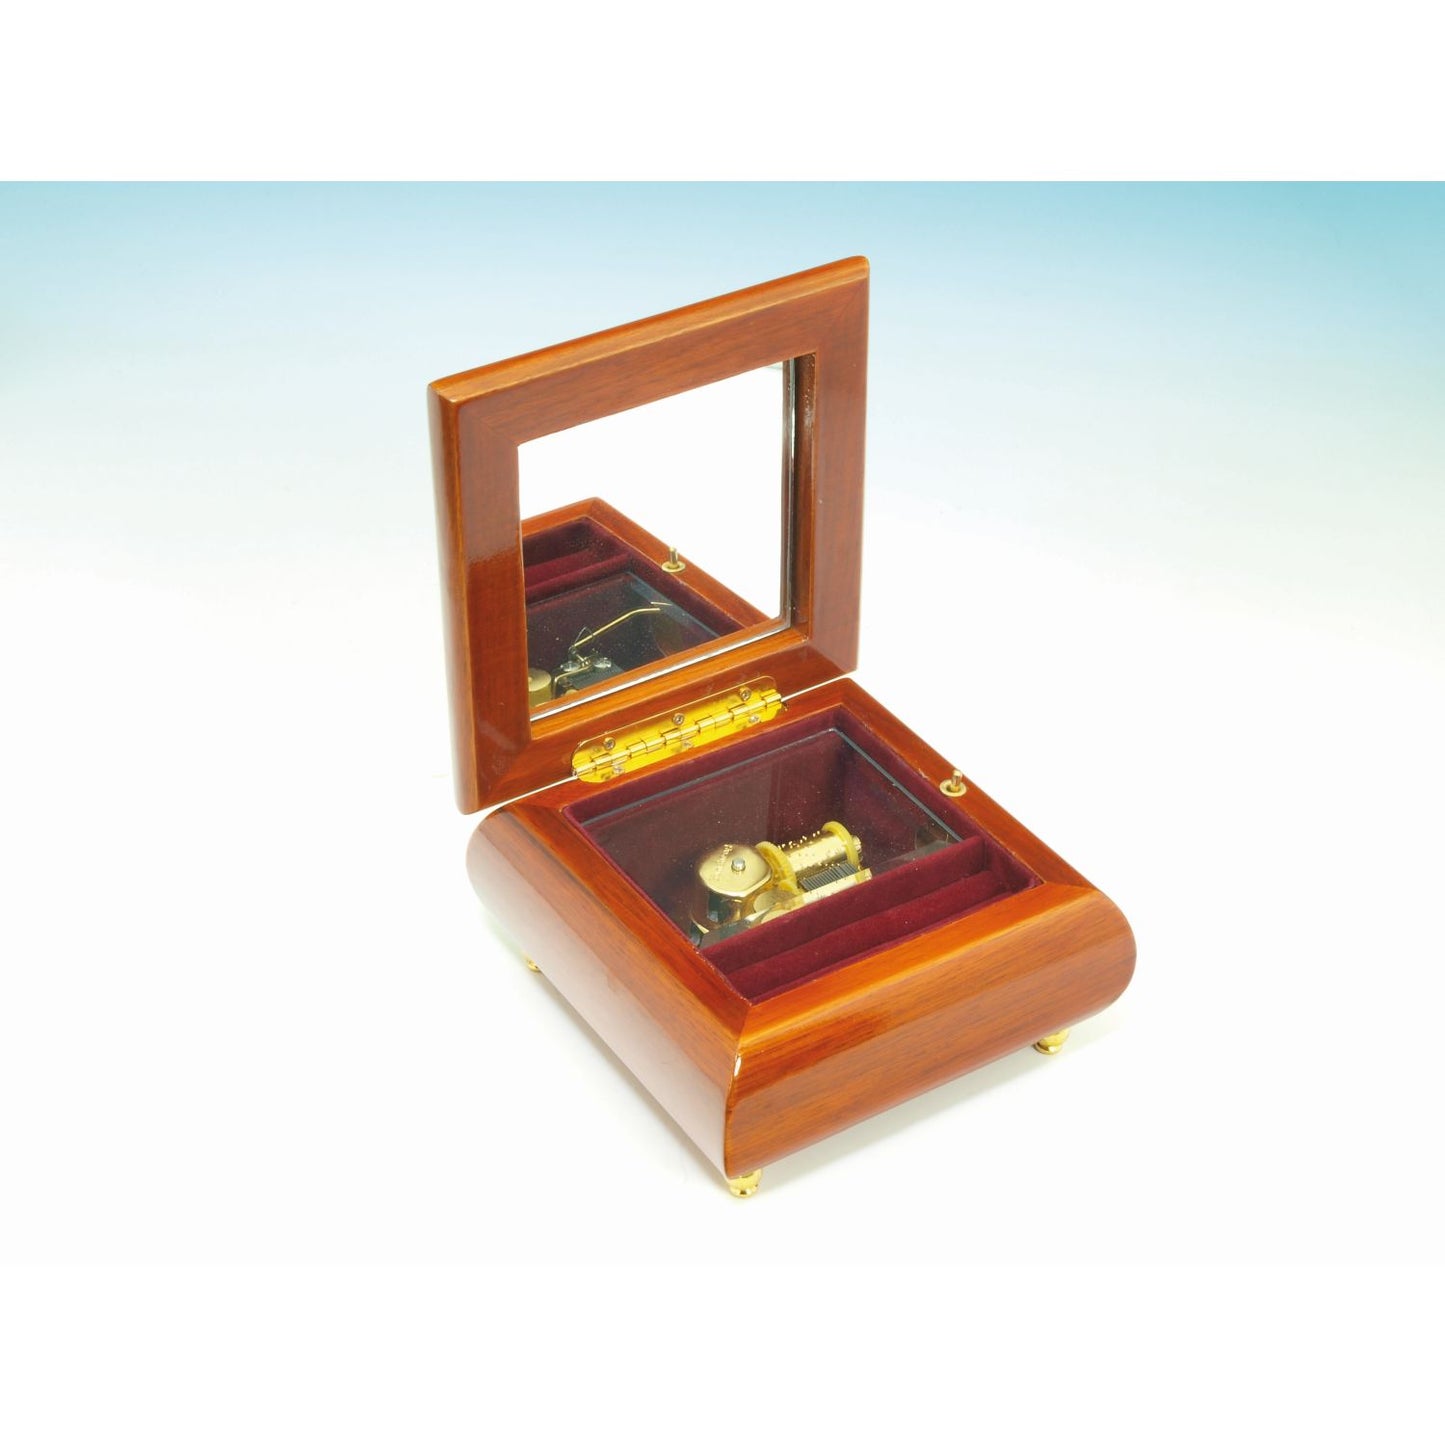 Musicbox Kingdom 4.9" Square Jewelry Box With Edelweiss In Marquetry Design